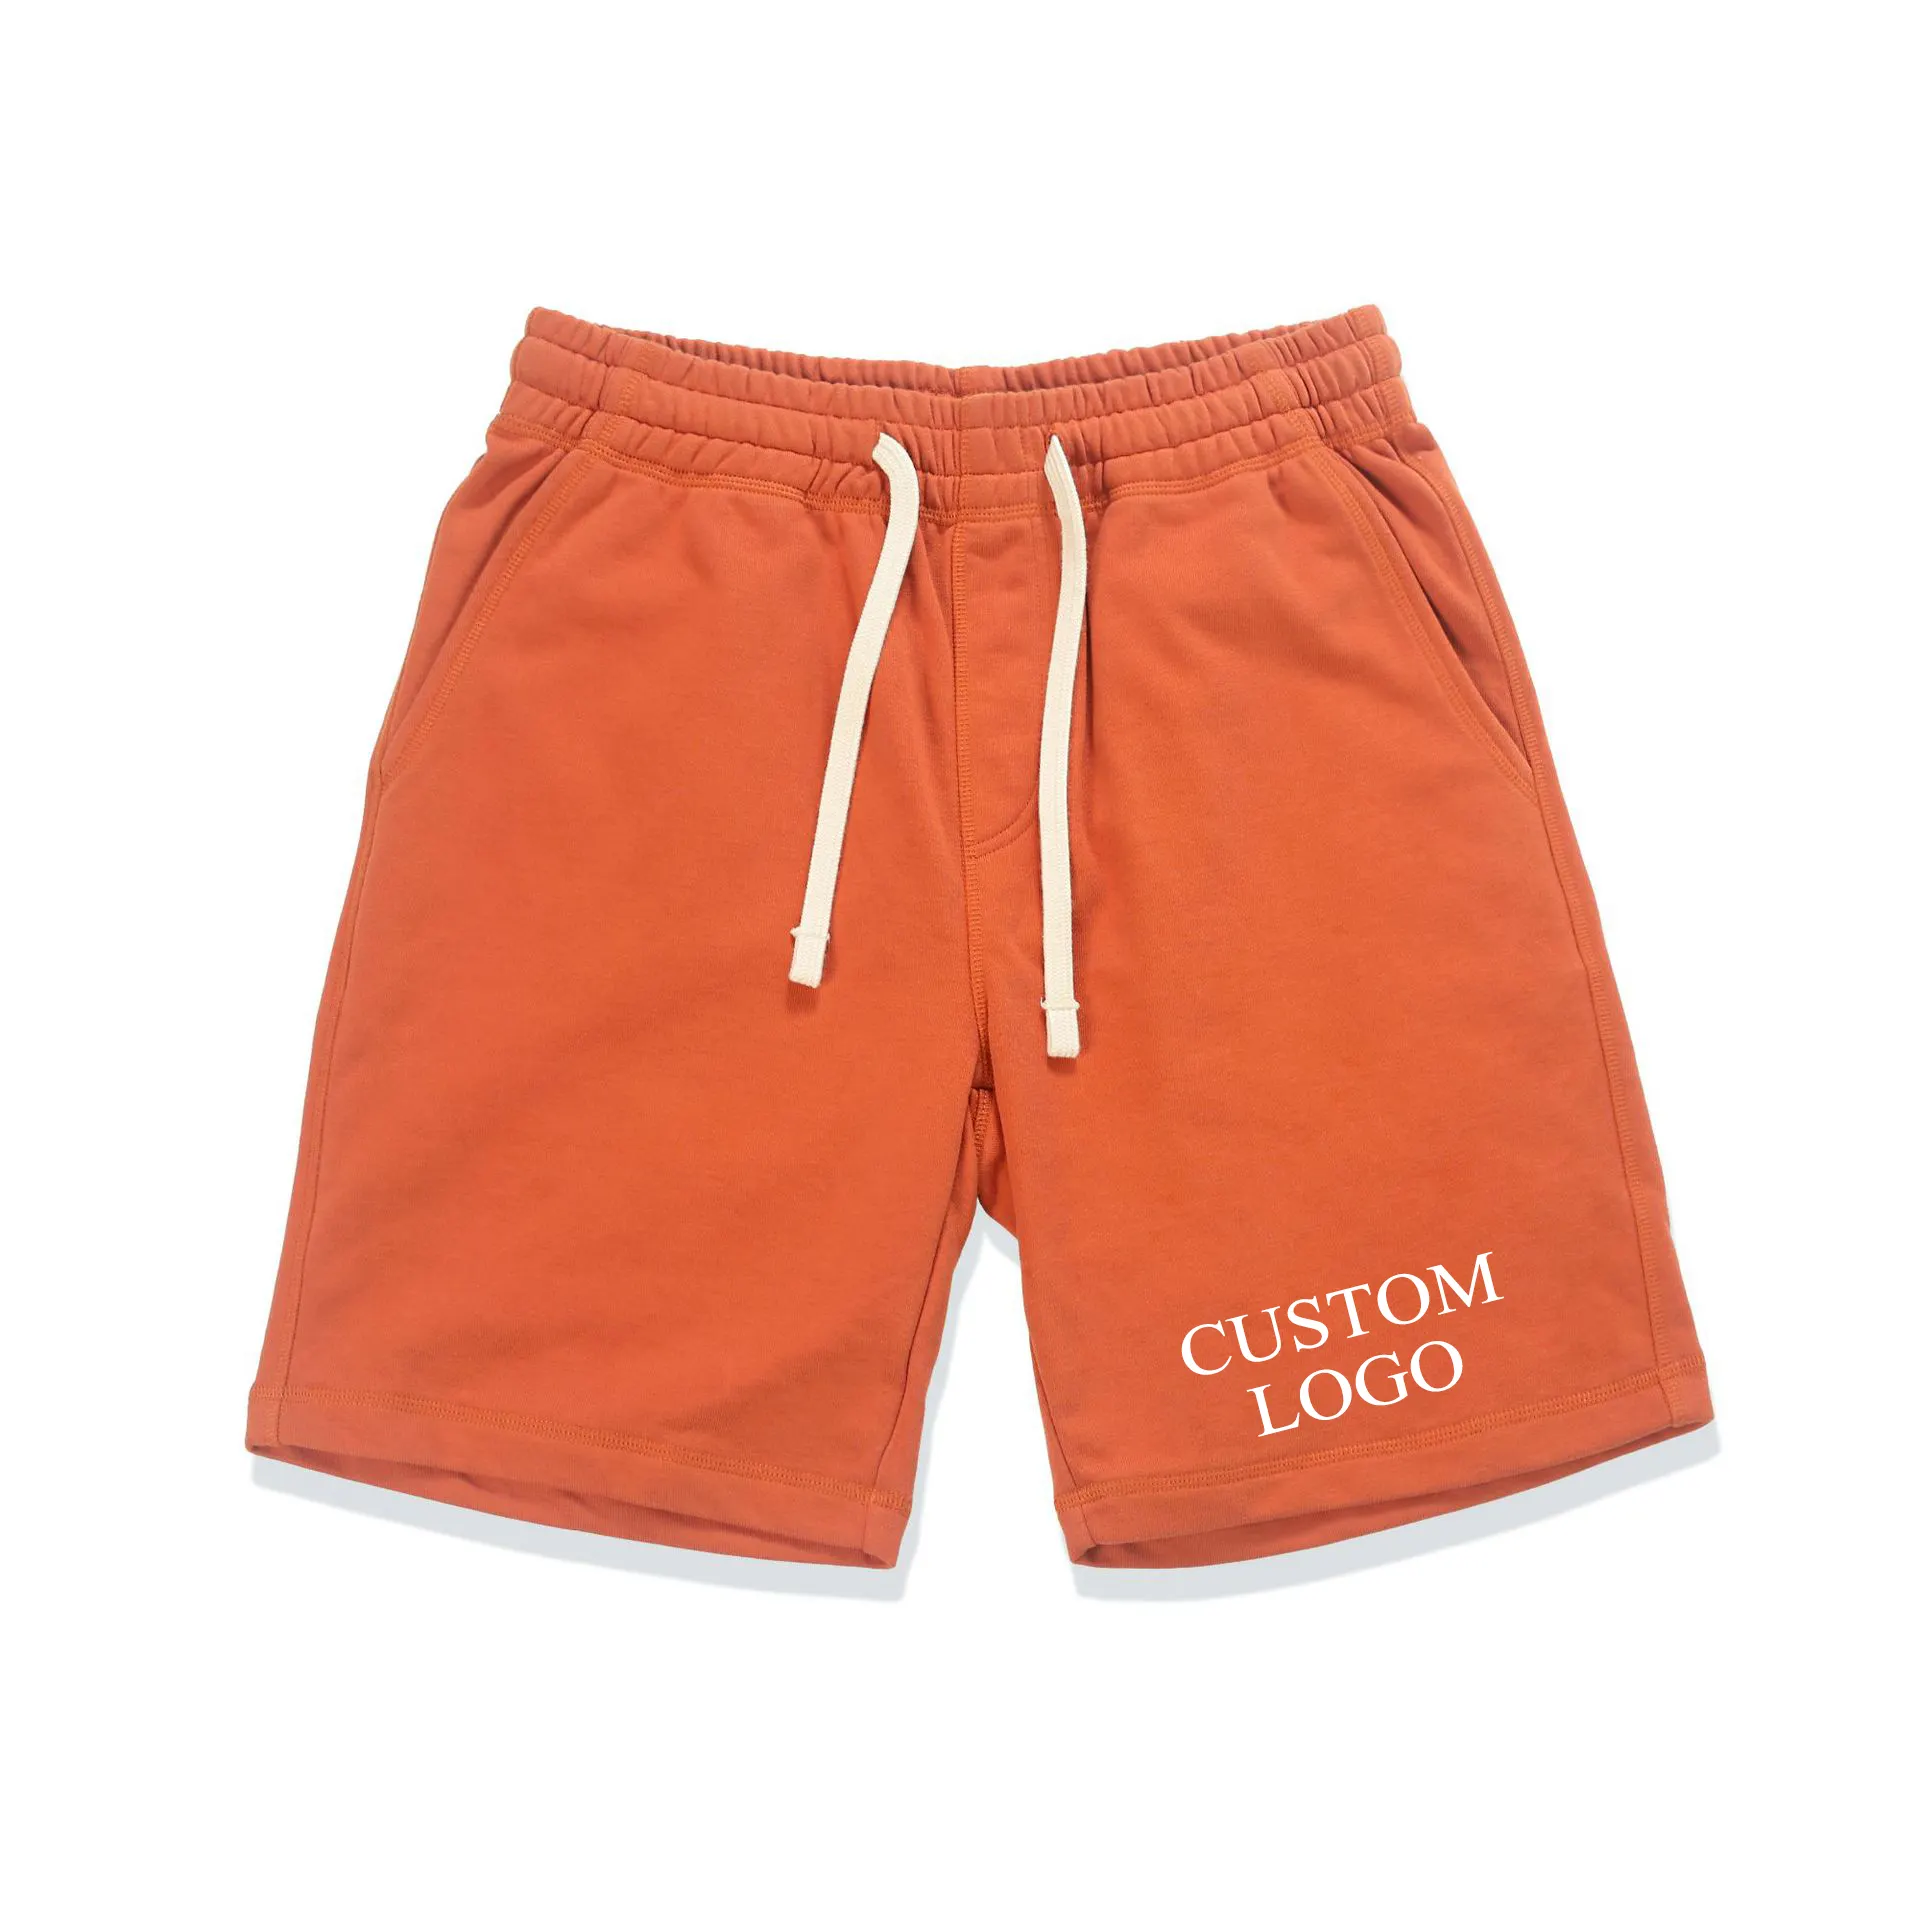 China clothing supplier high quality blank sports shorts joggers men plain sweat shorts for men